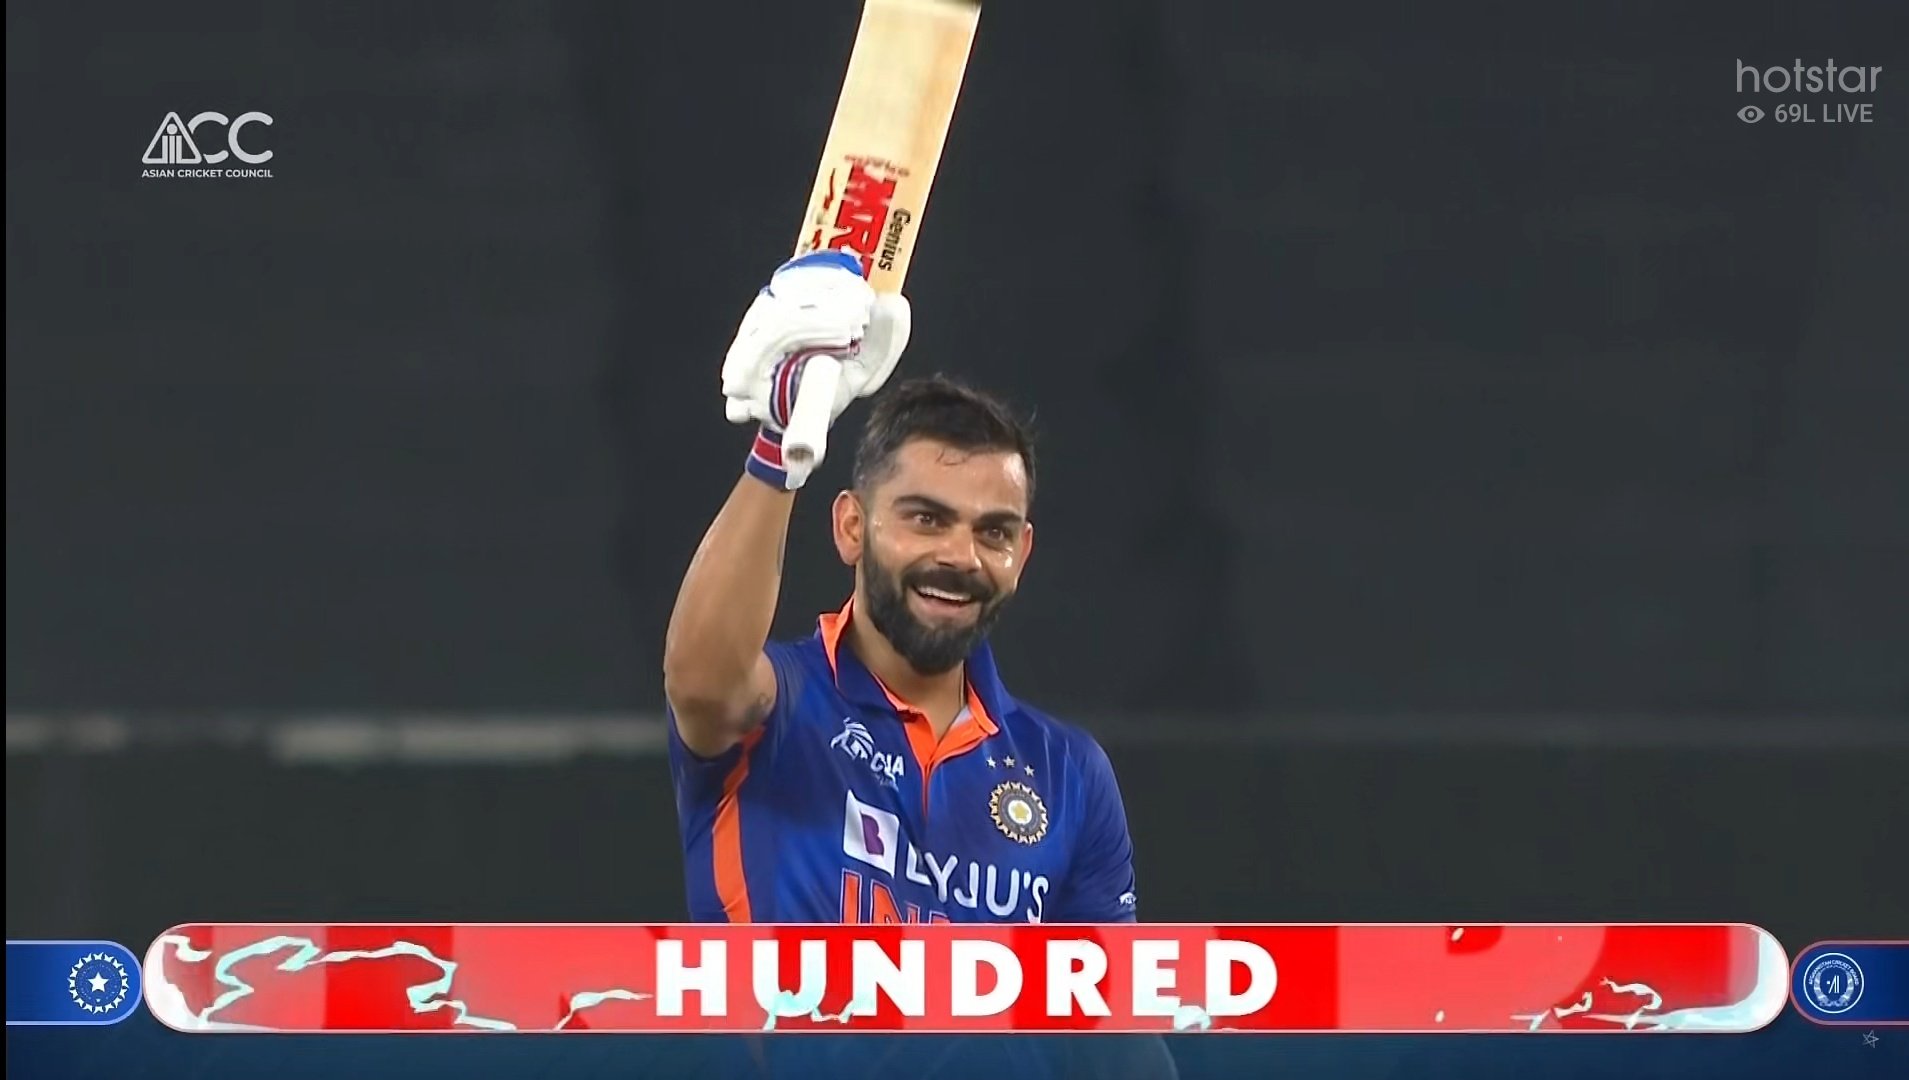 Kohli hits his 71st century after more than 1000 days